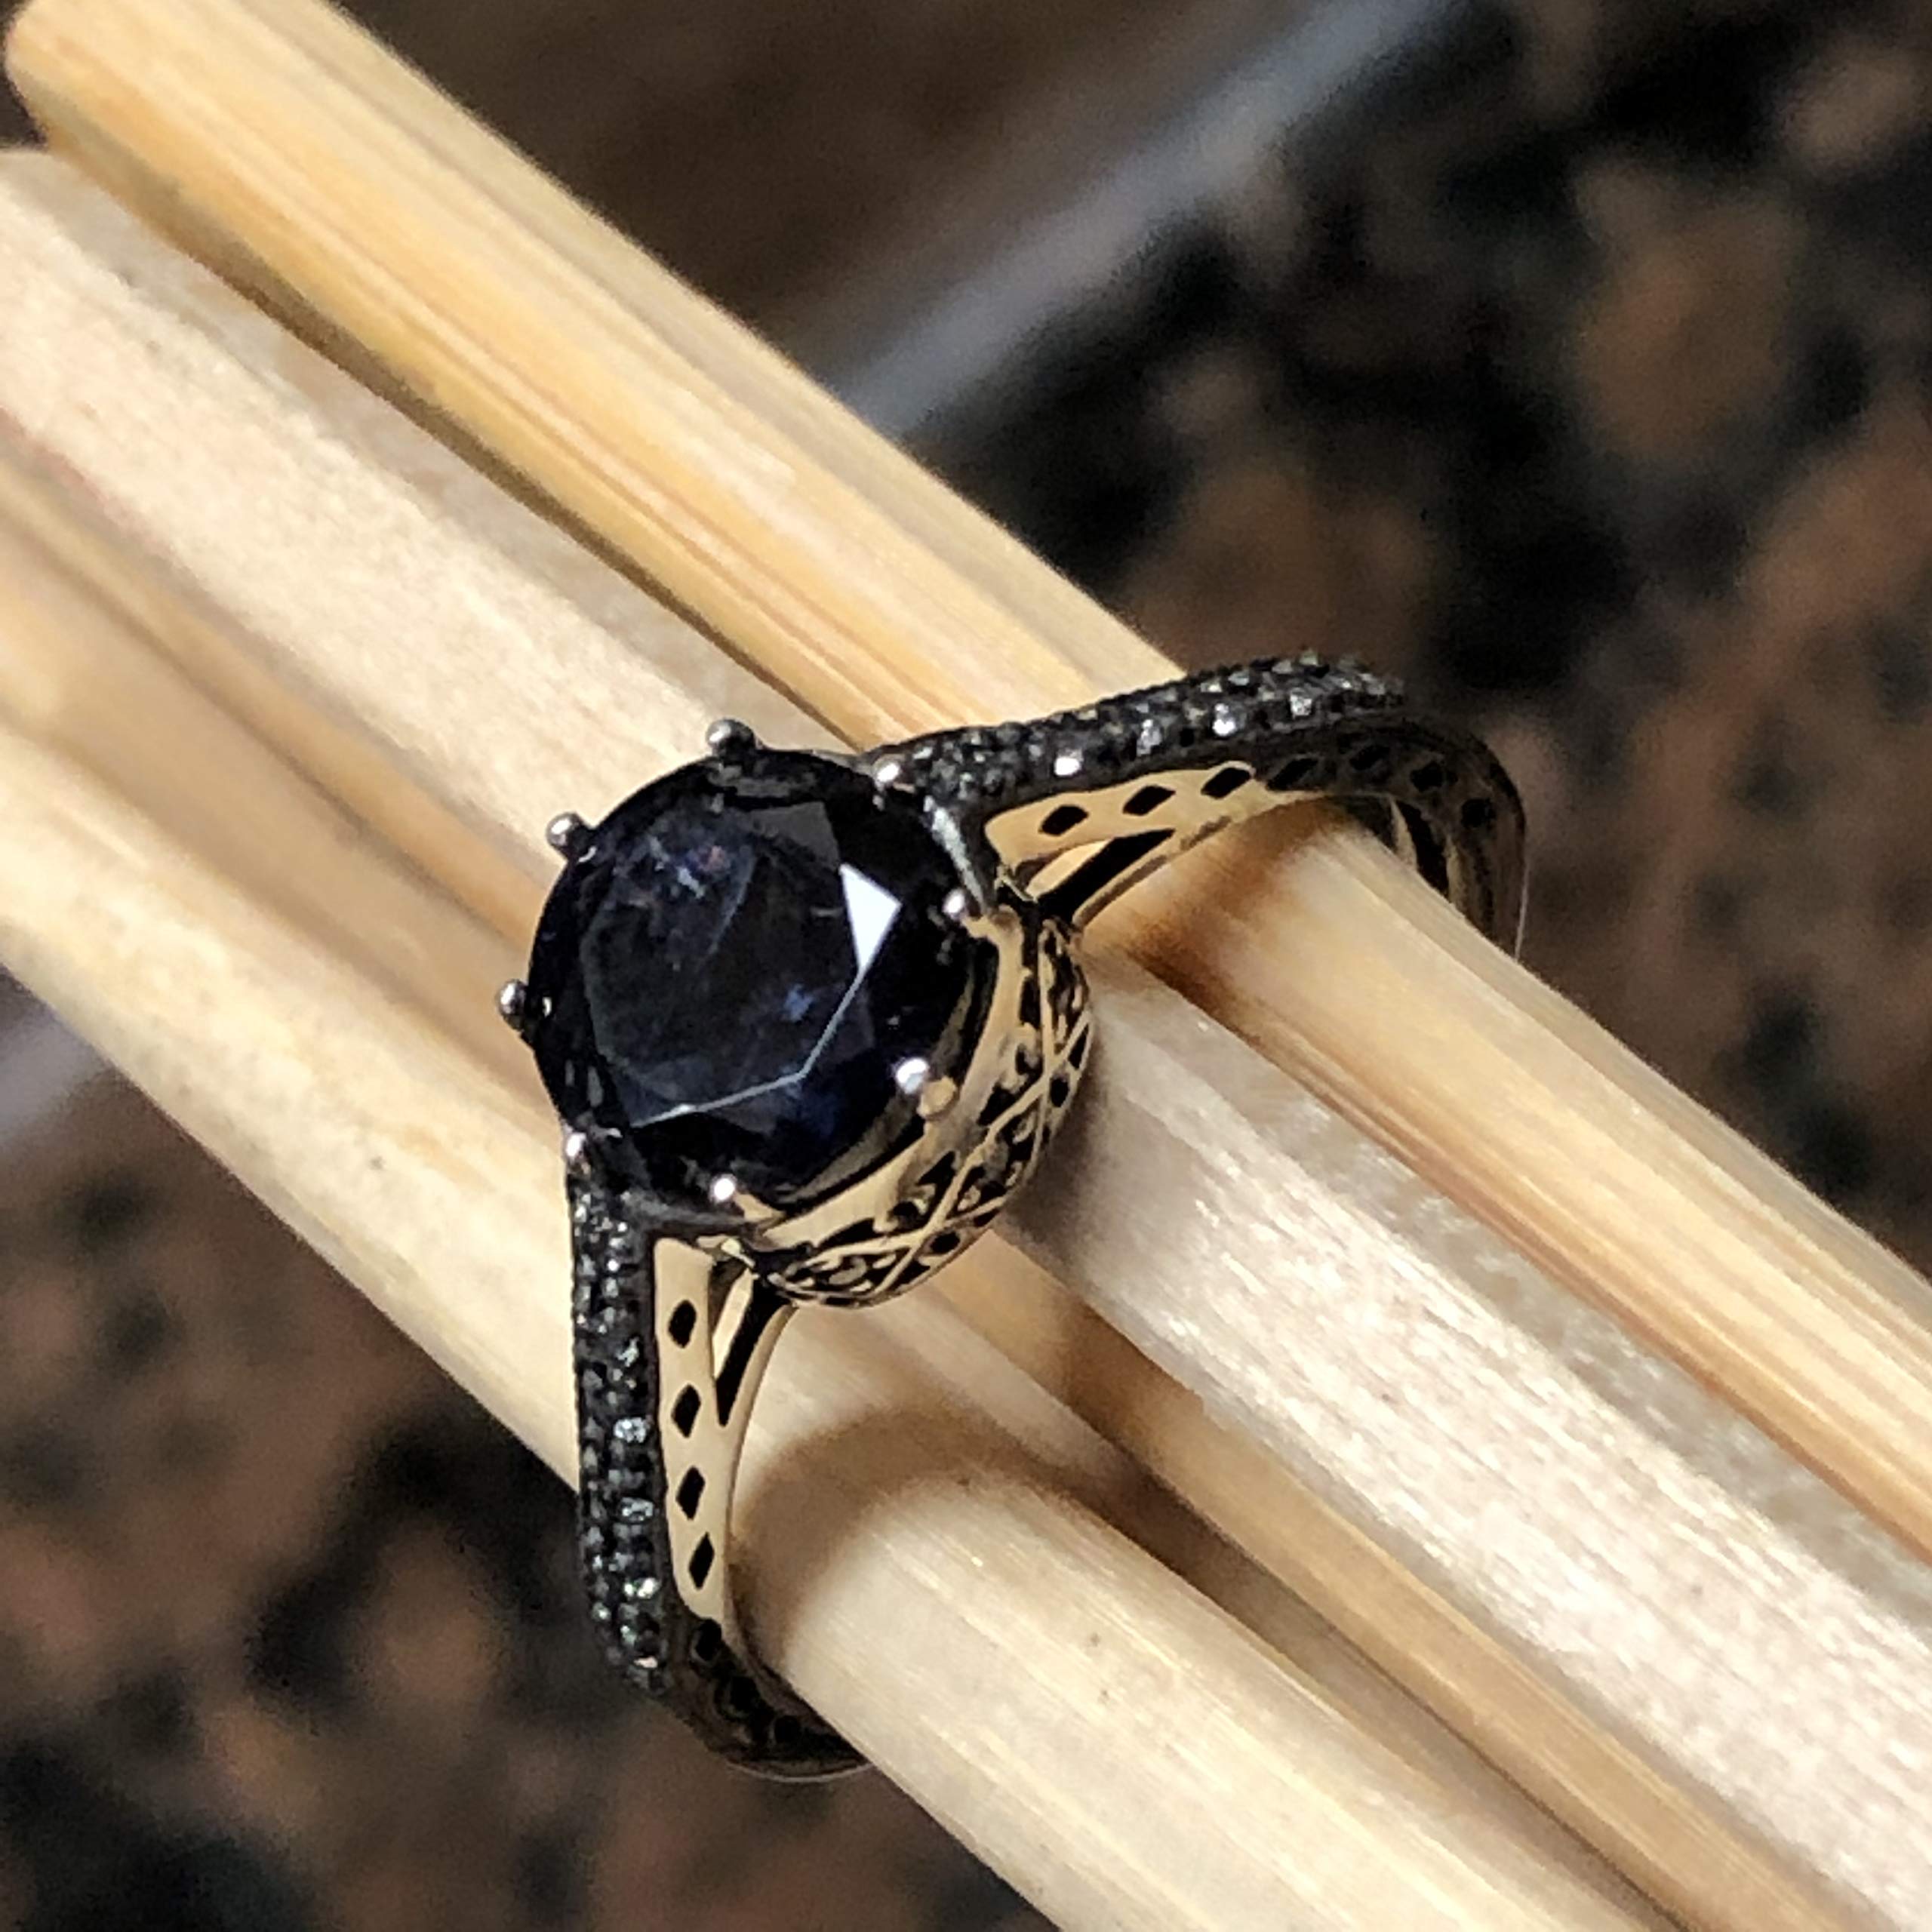 Natural 1ct Iolite Water Sapphire 925 Solid Sterling Silver Engagement Filigree Ring Size 6, 7, 8, 9 - Natural Rocks by Kala